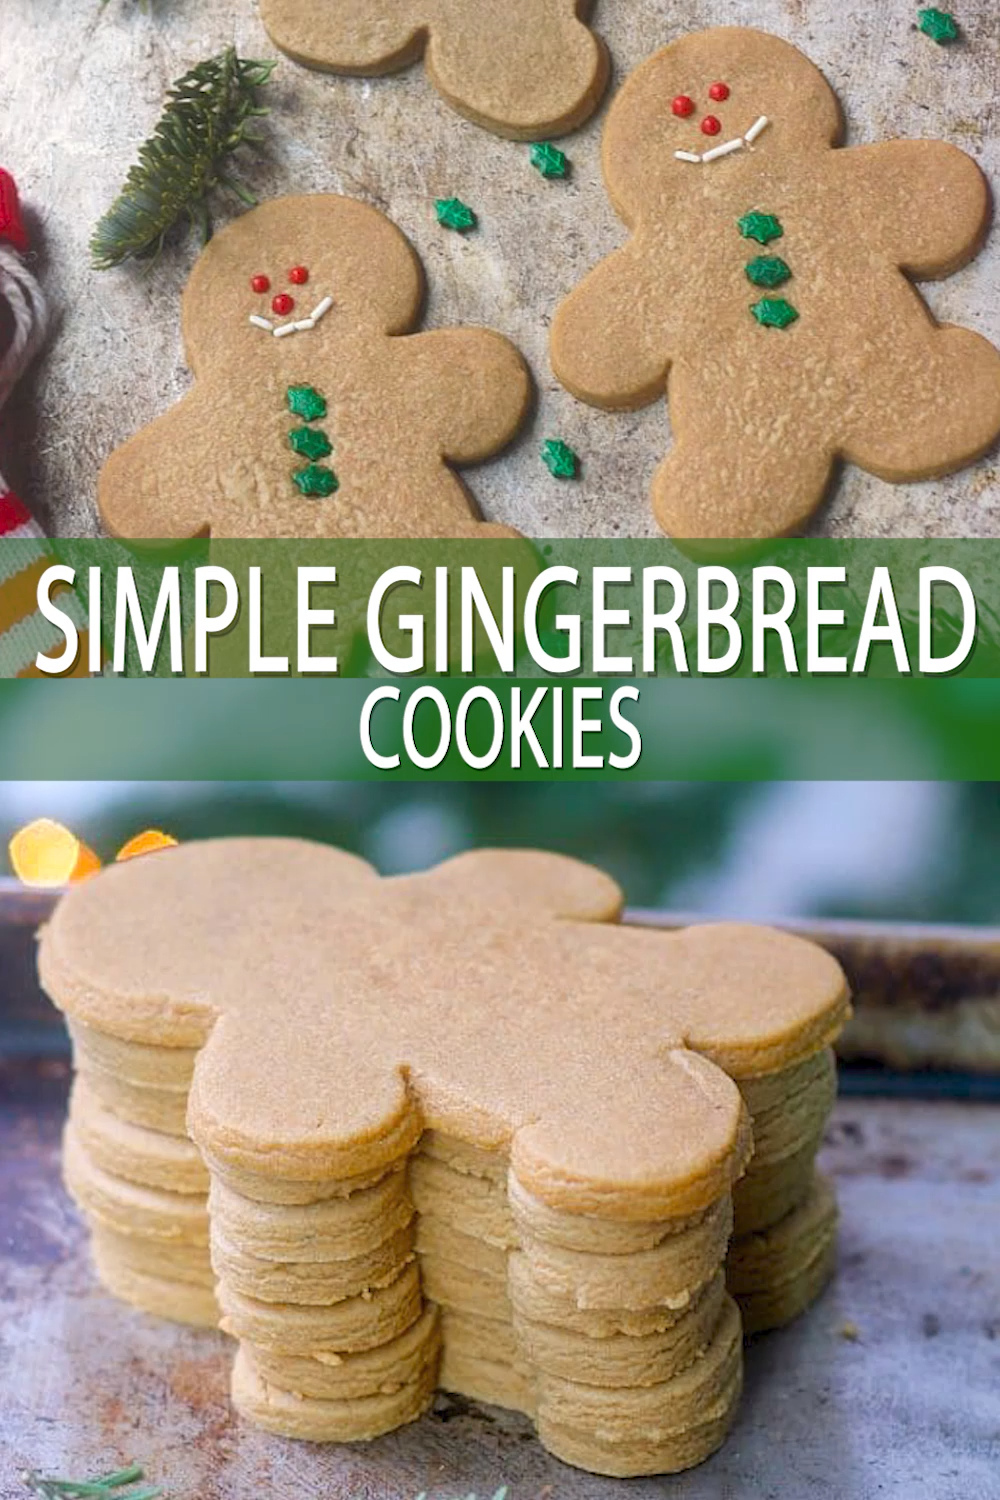 Easy Gingerbread Cookies without Molasses - Easy Gingerbread Cookies without Molasses -   19 gingerbread cookies without molasses soft ideas